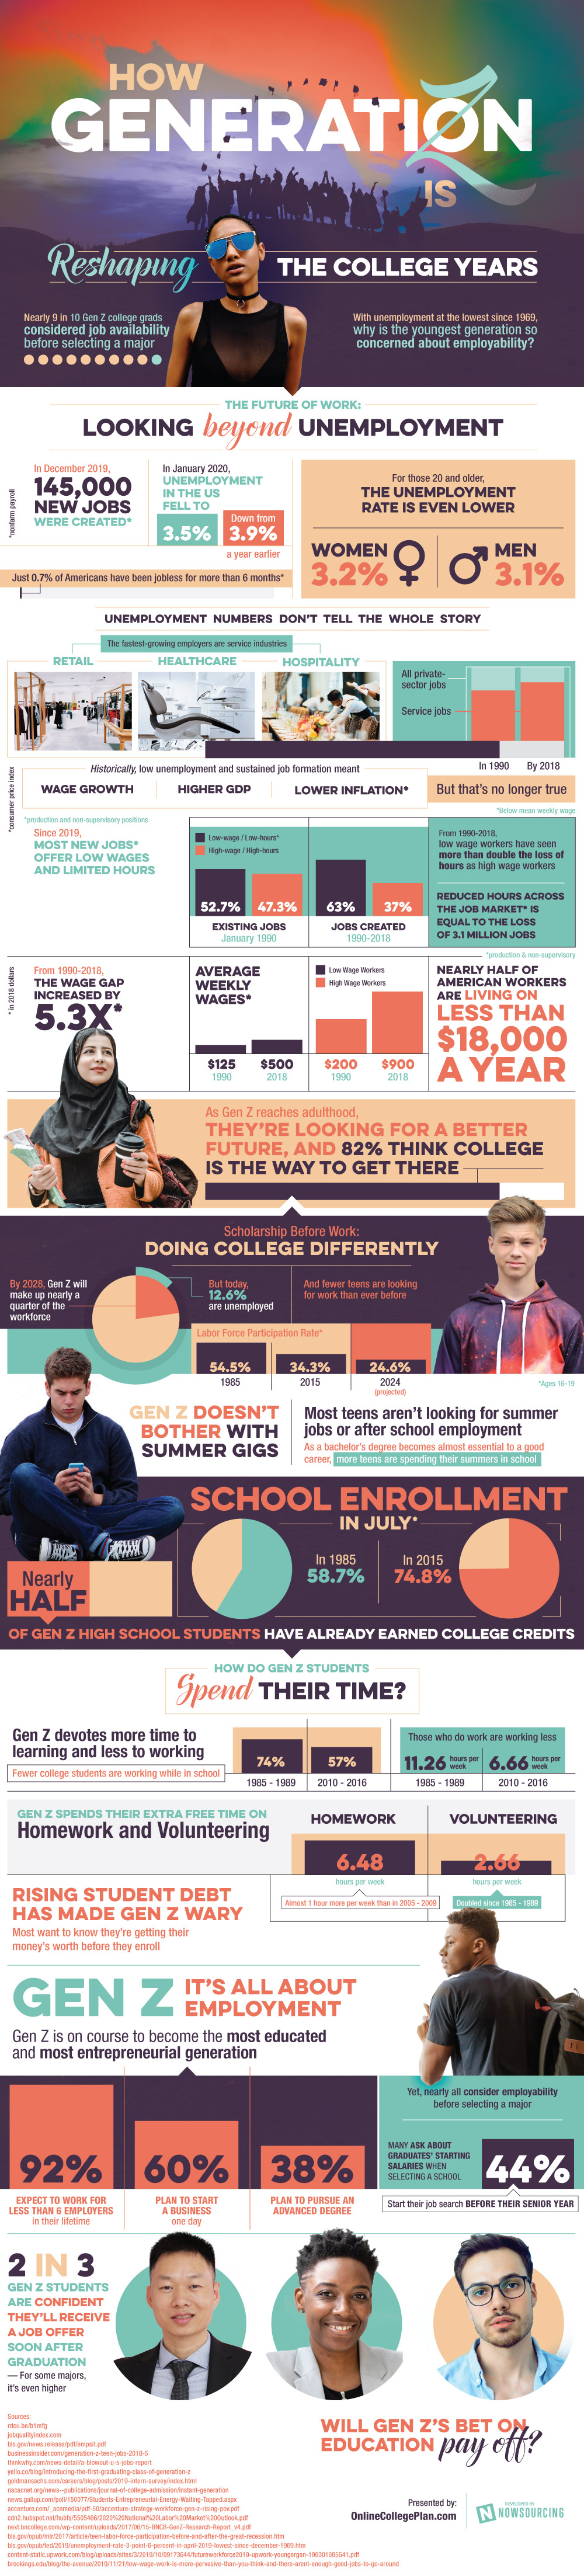 How Gen Z is Reshaping the College Years